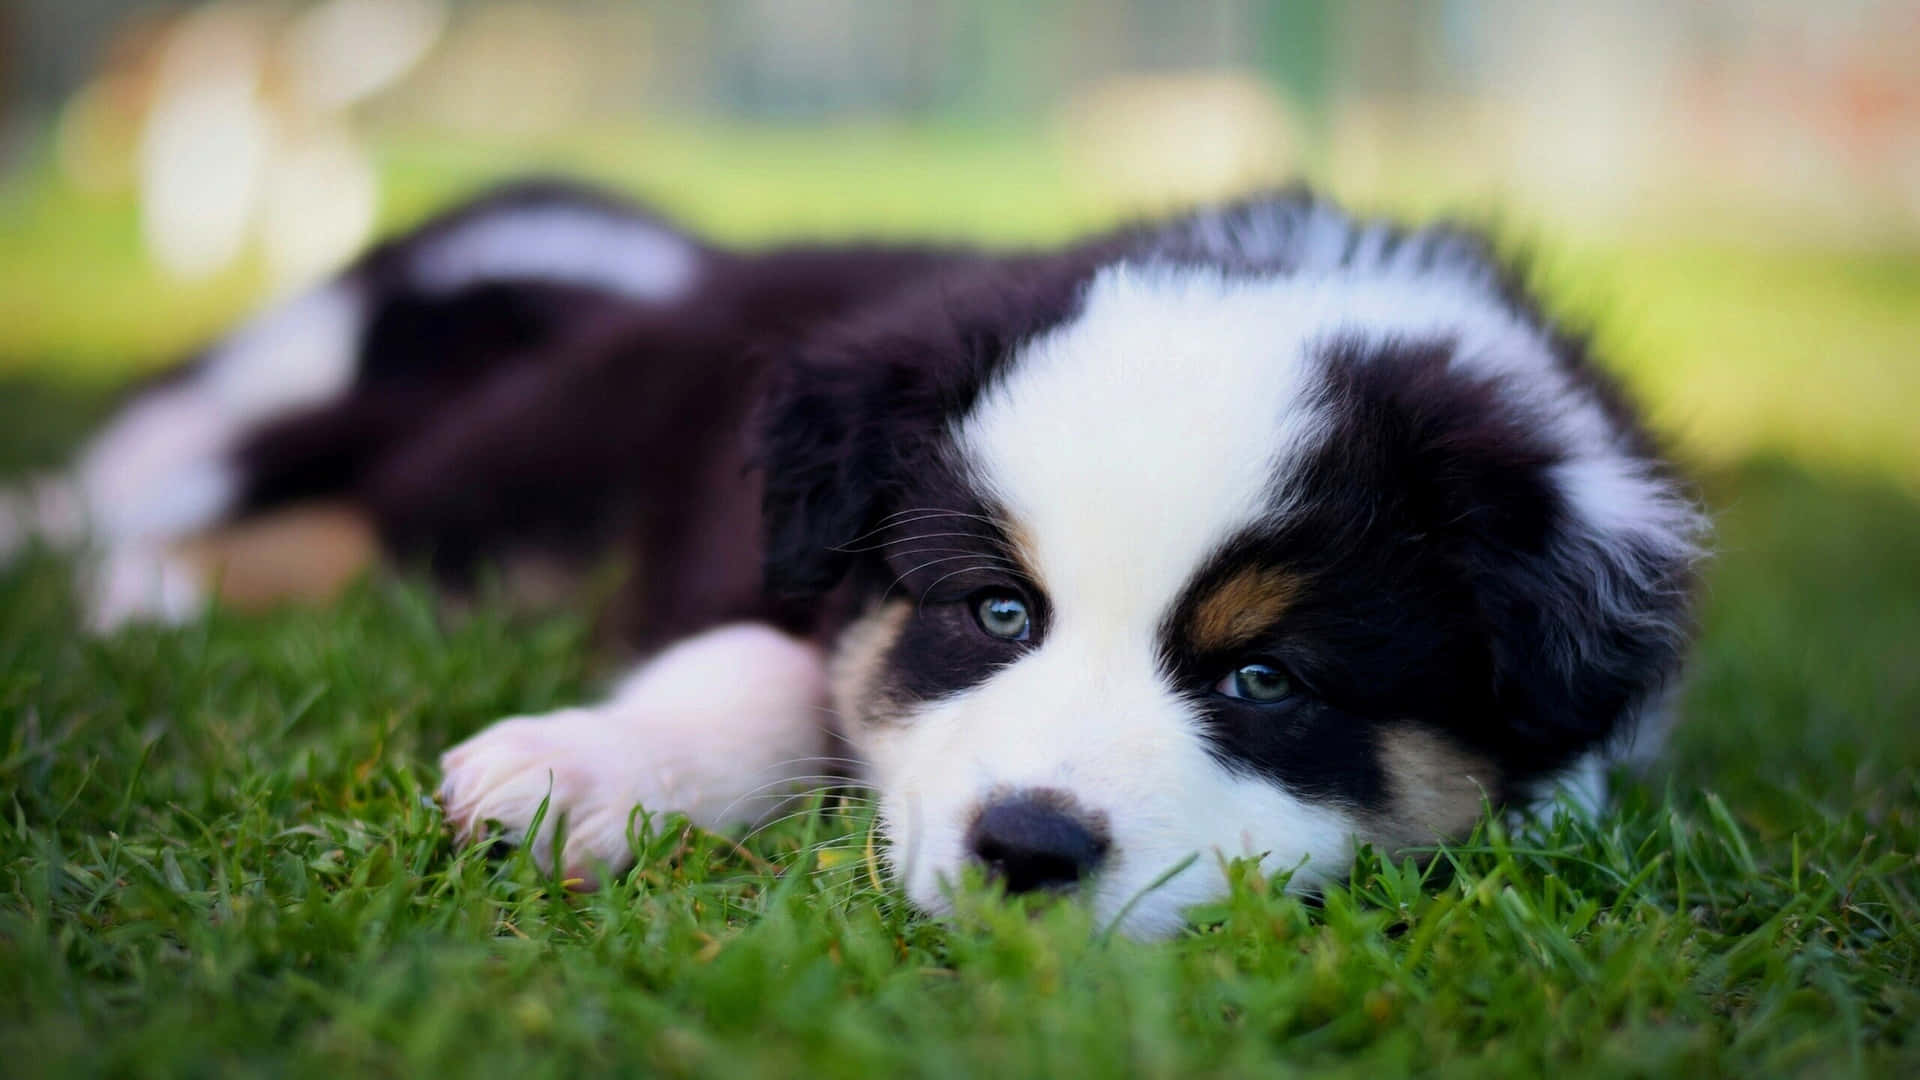 This cute puppy is too adorable!